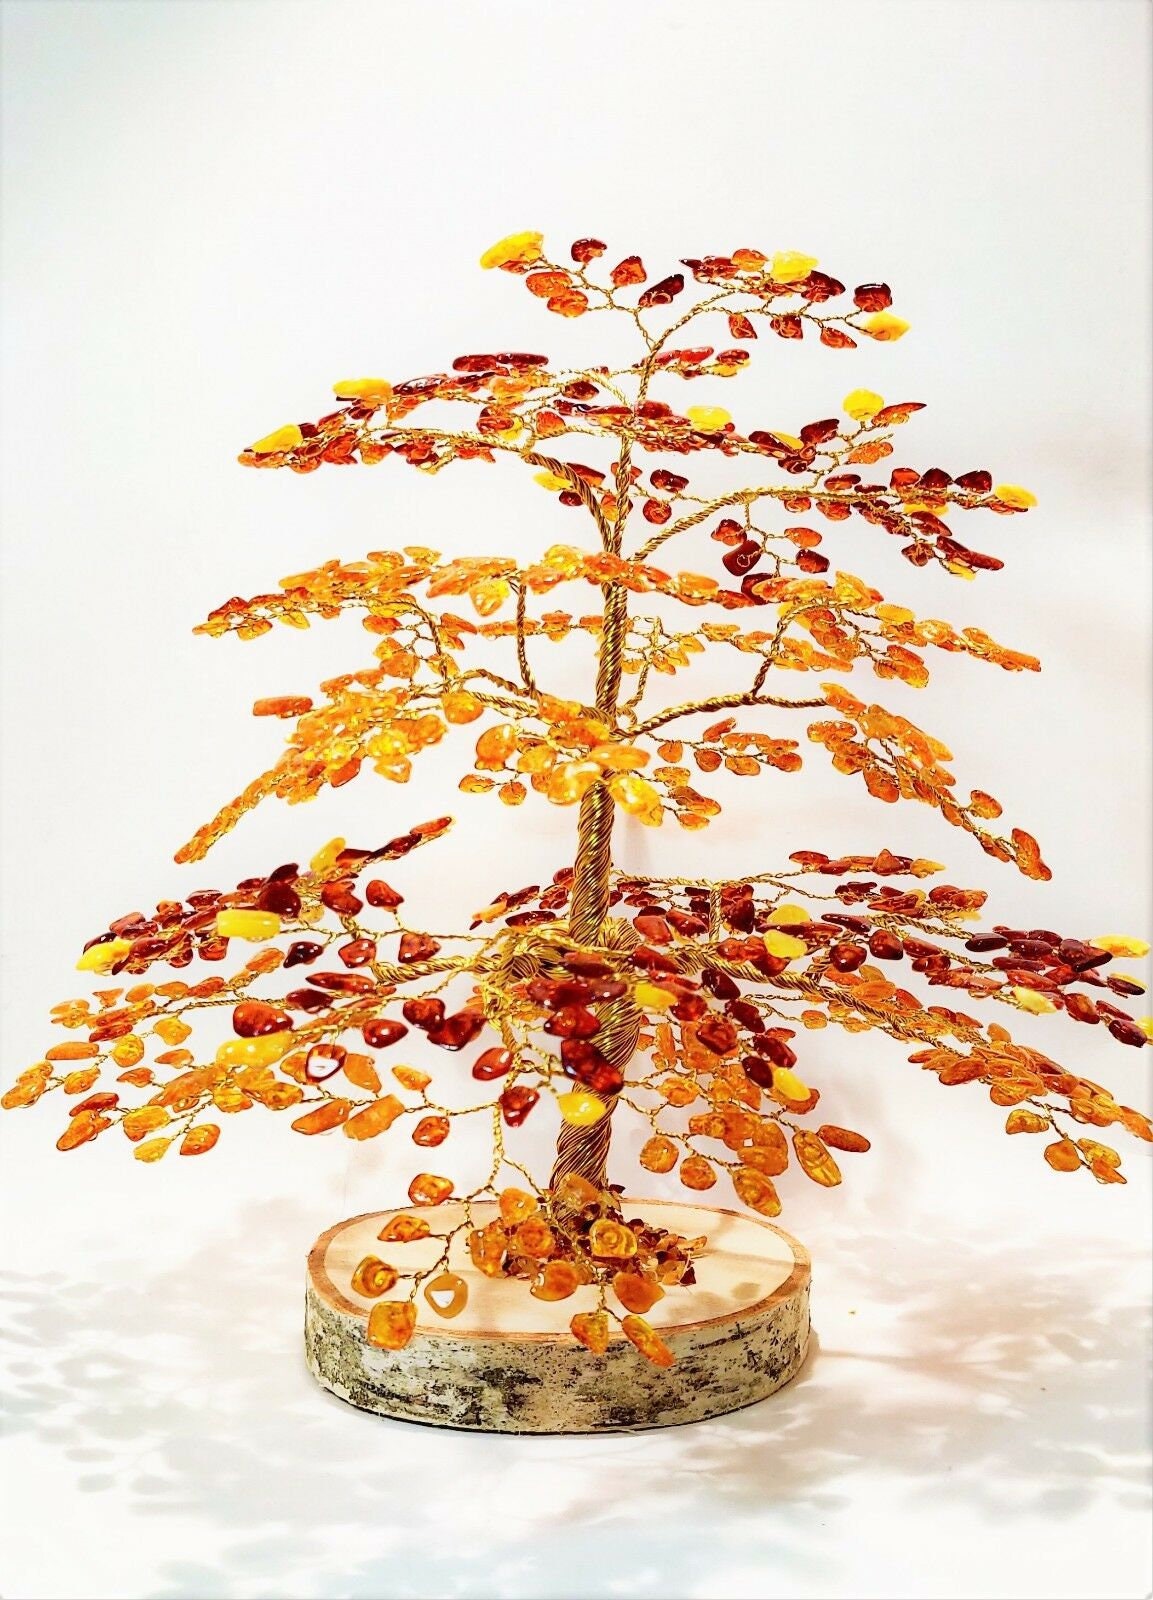 NATURAL BALTIC AMBER TREE OF HAPPINESS 琥珀樹 100% NATURAL BALTIC AMBER